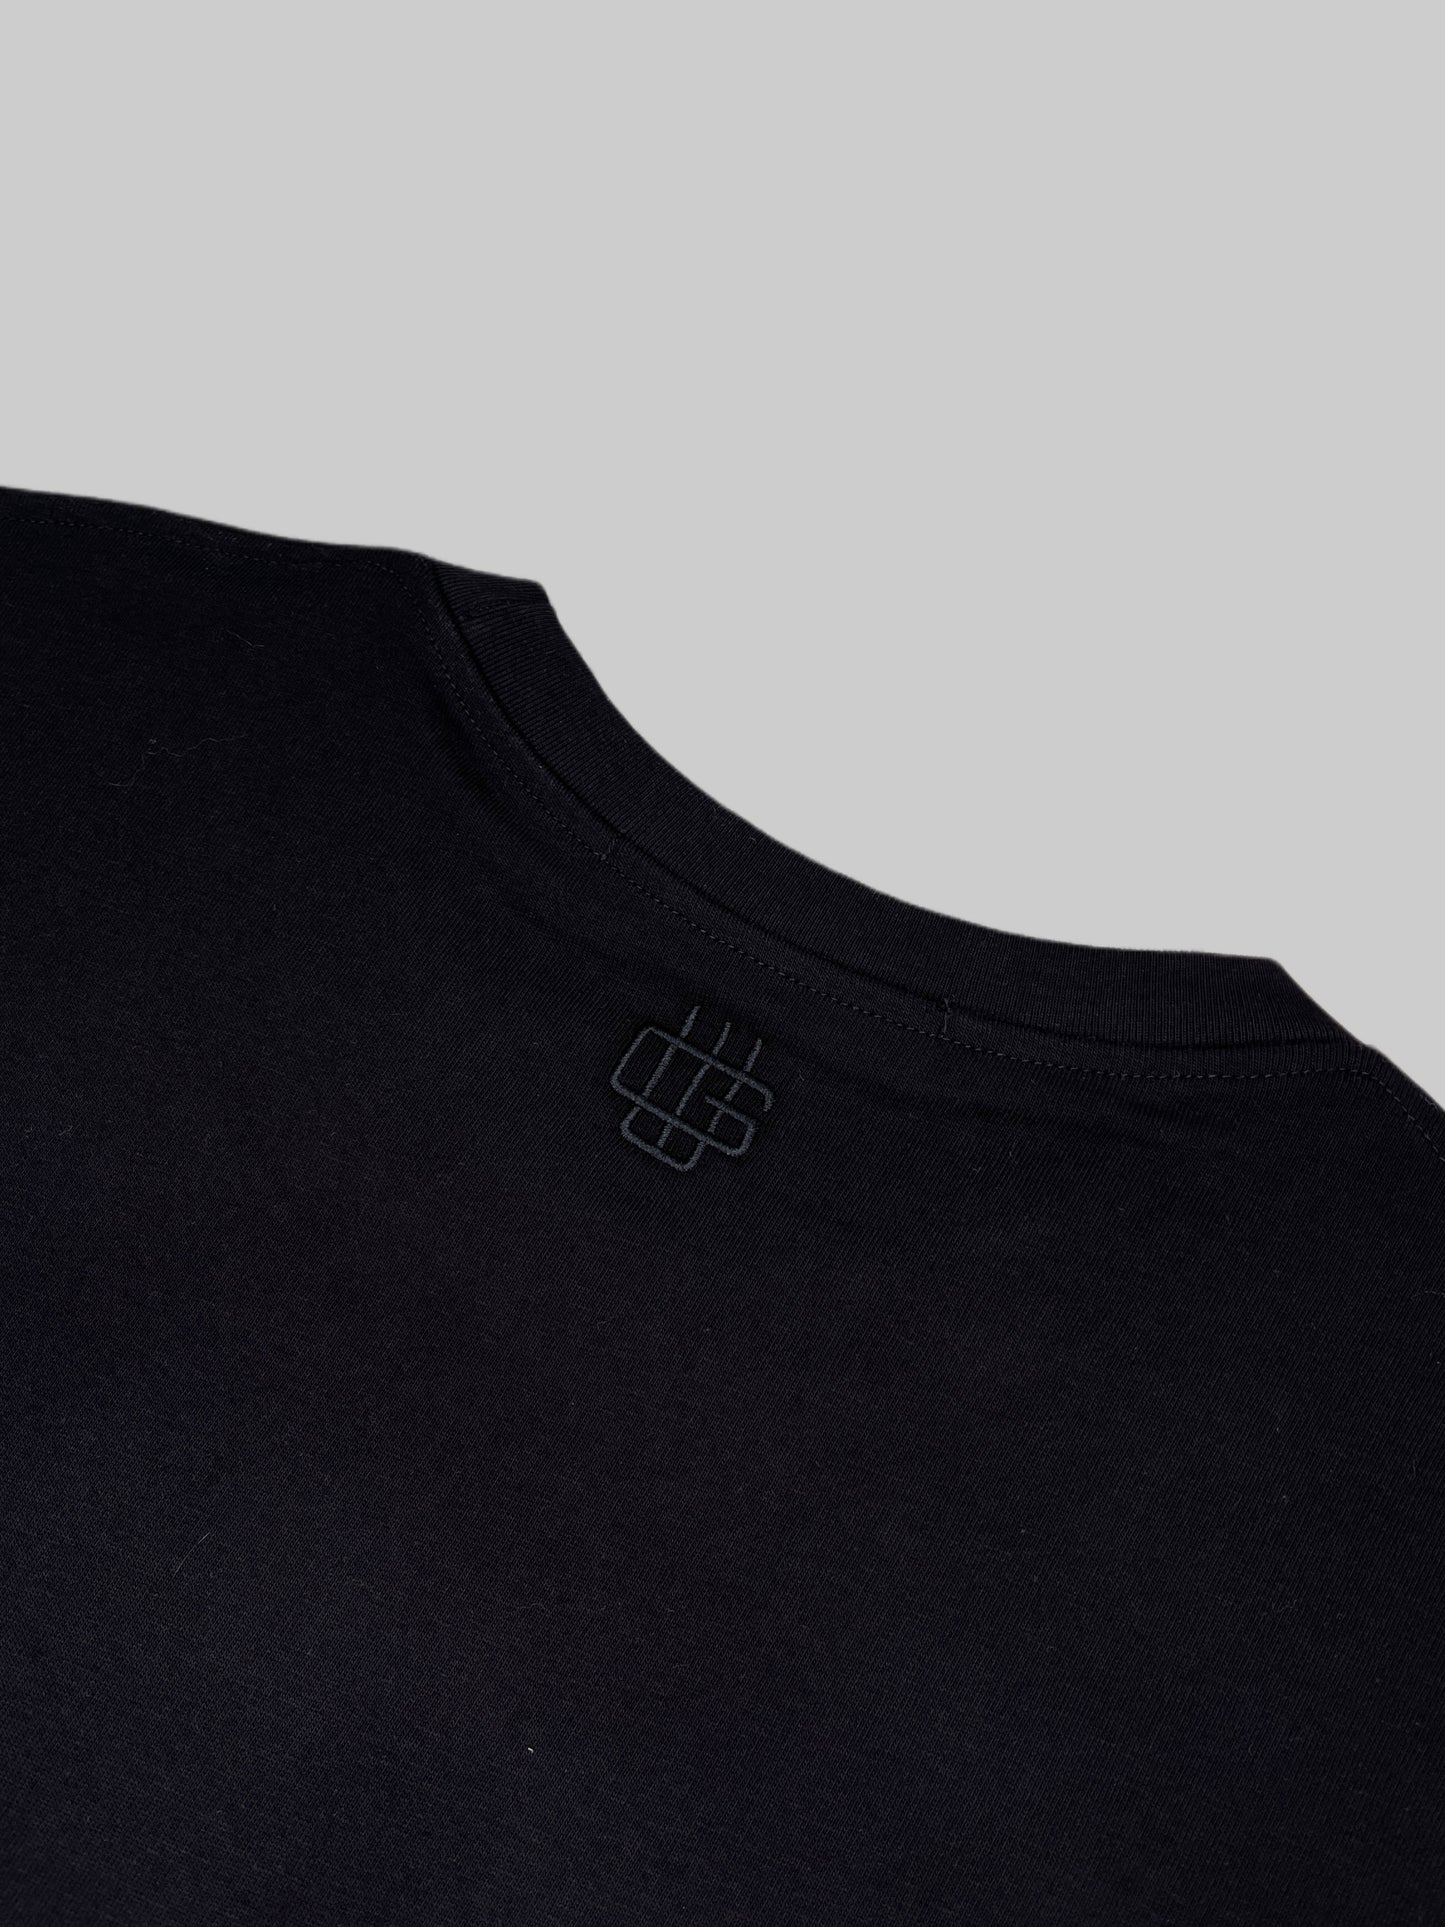 Black Embroidered Boxy Tee 'COZY' Garment Workshop